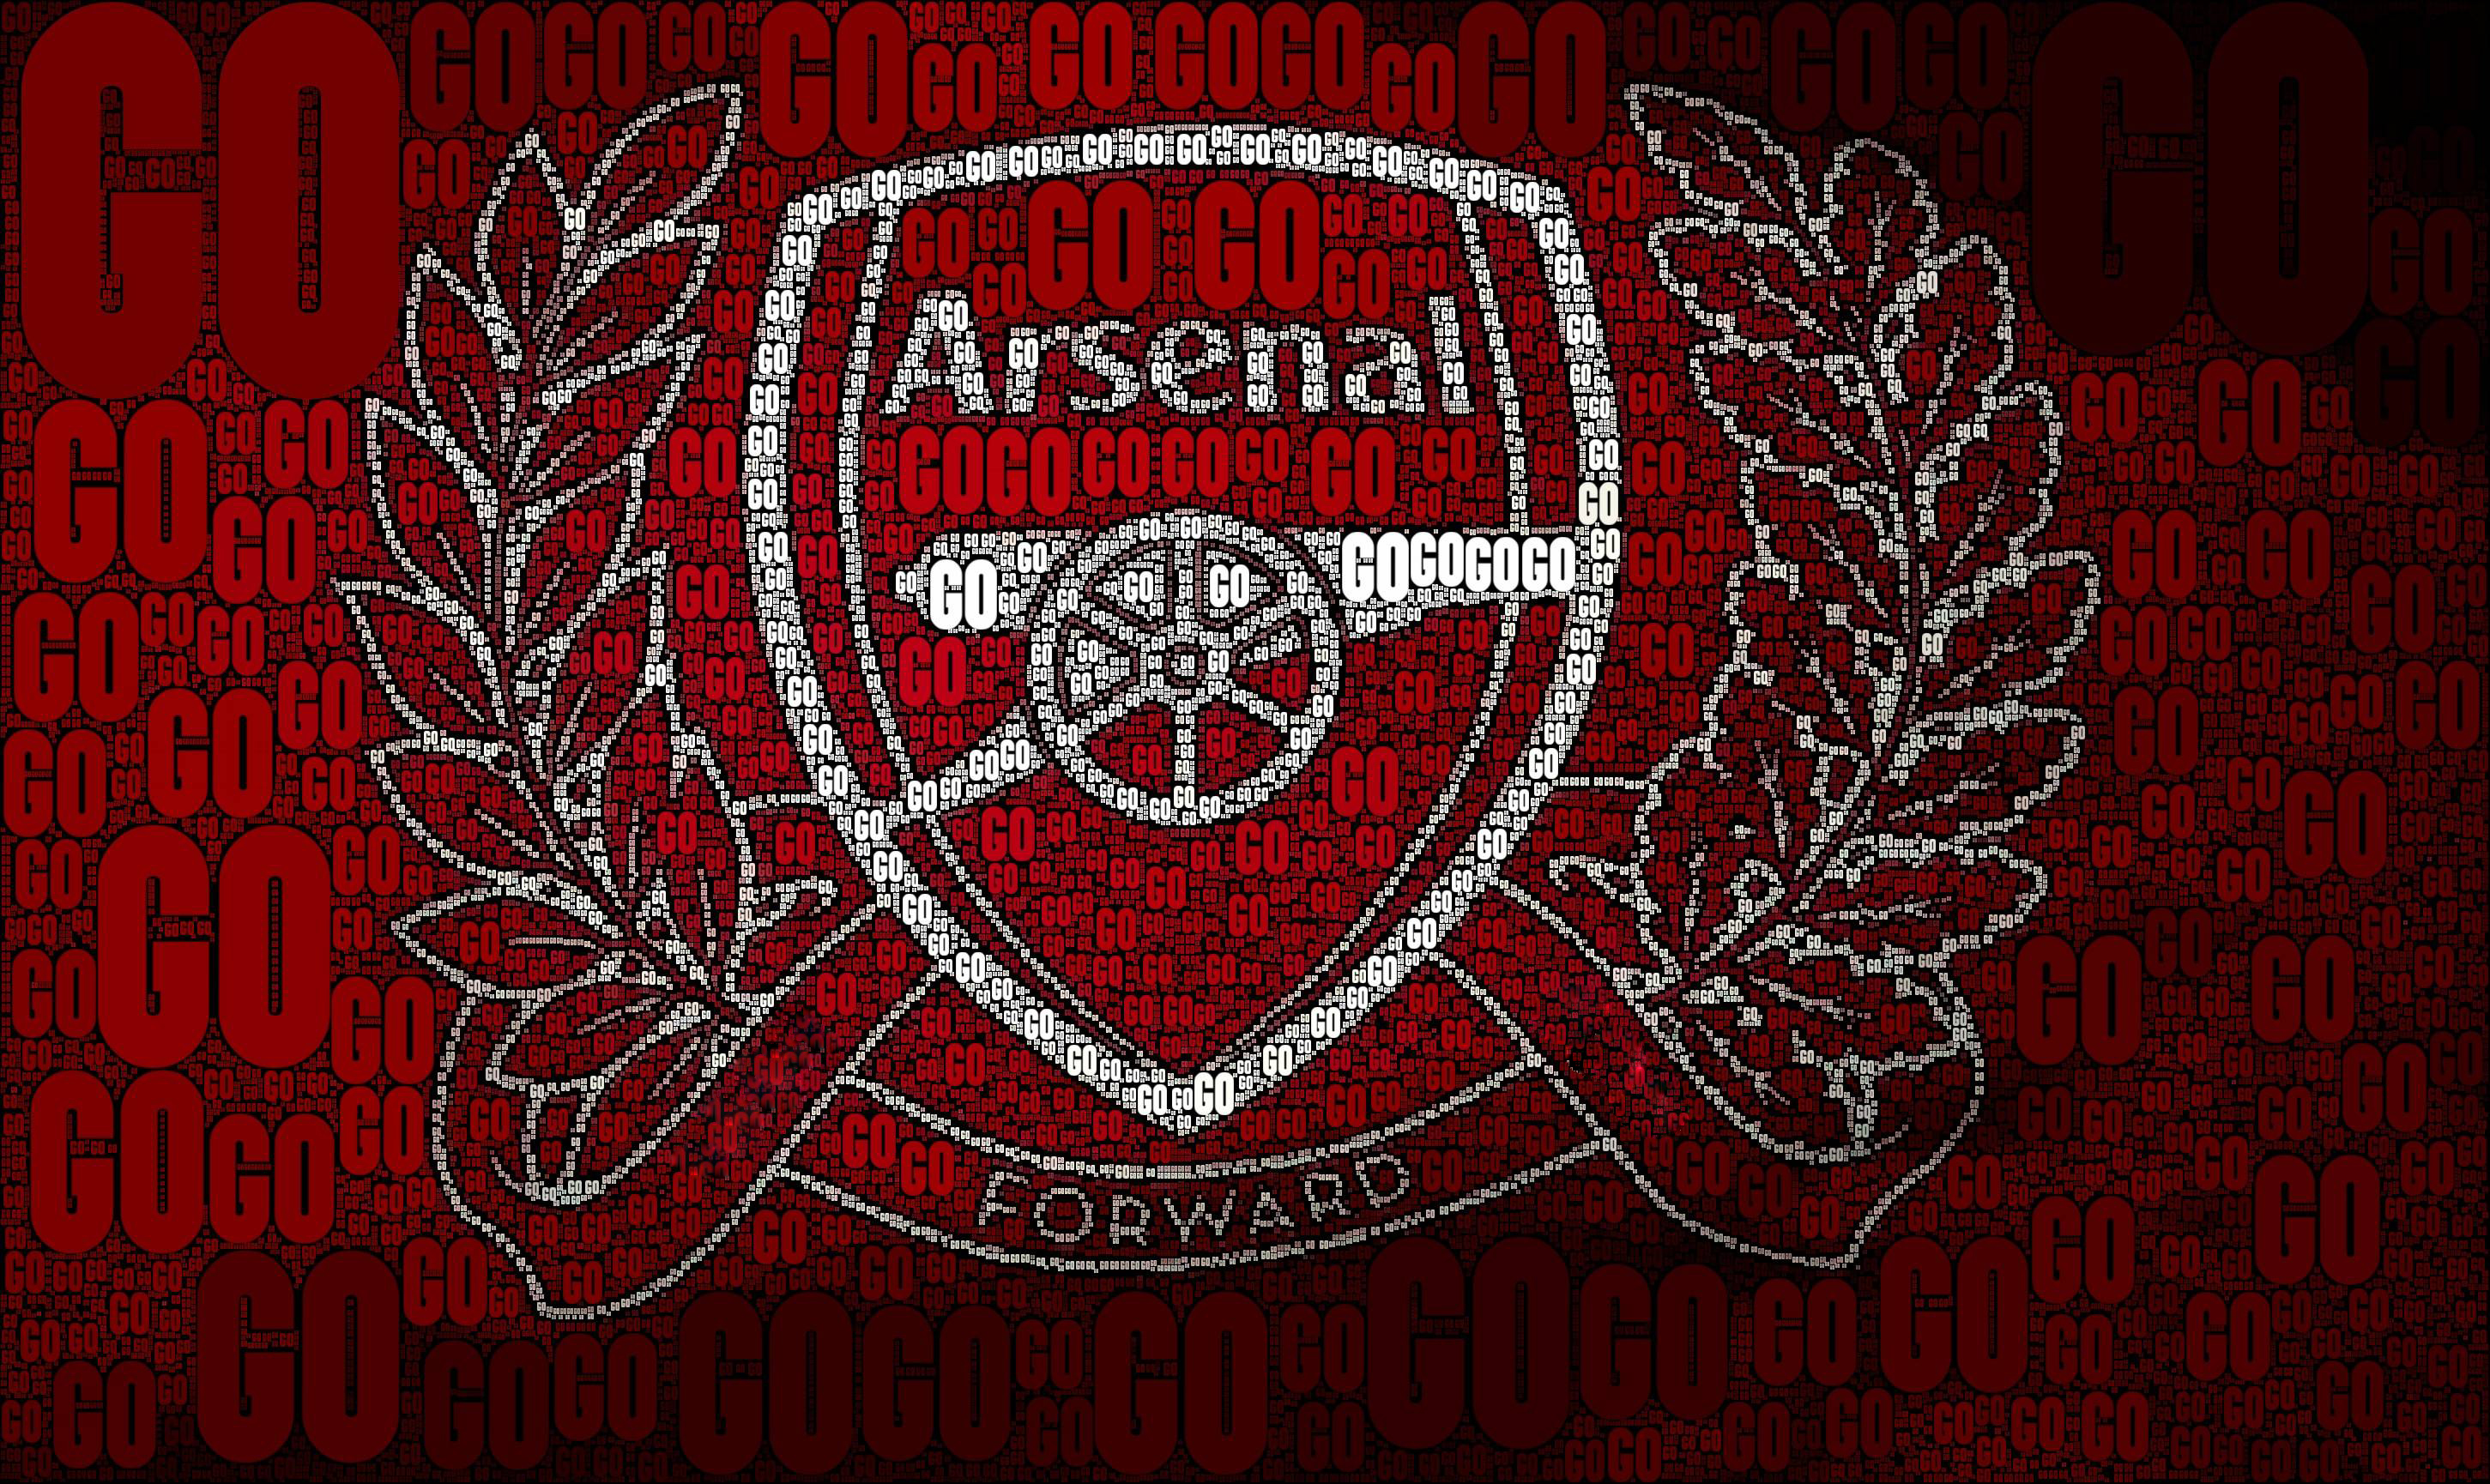 70+ Arsenal F.C. HD Wallpapers and Backgrounds